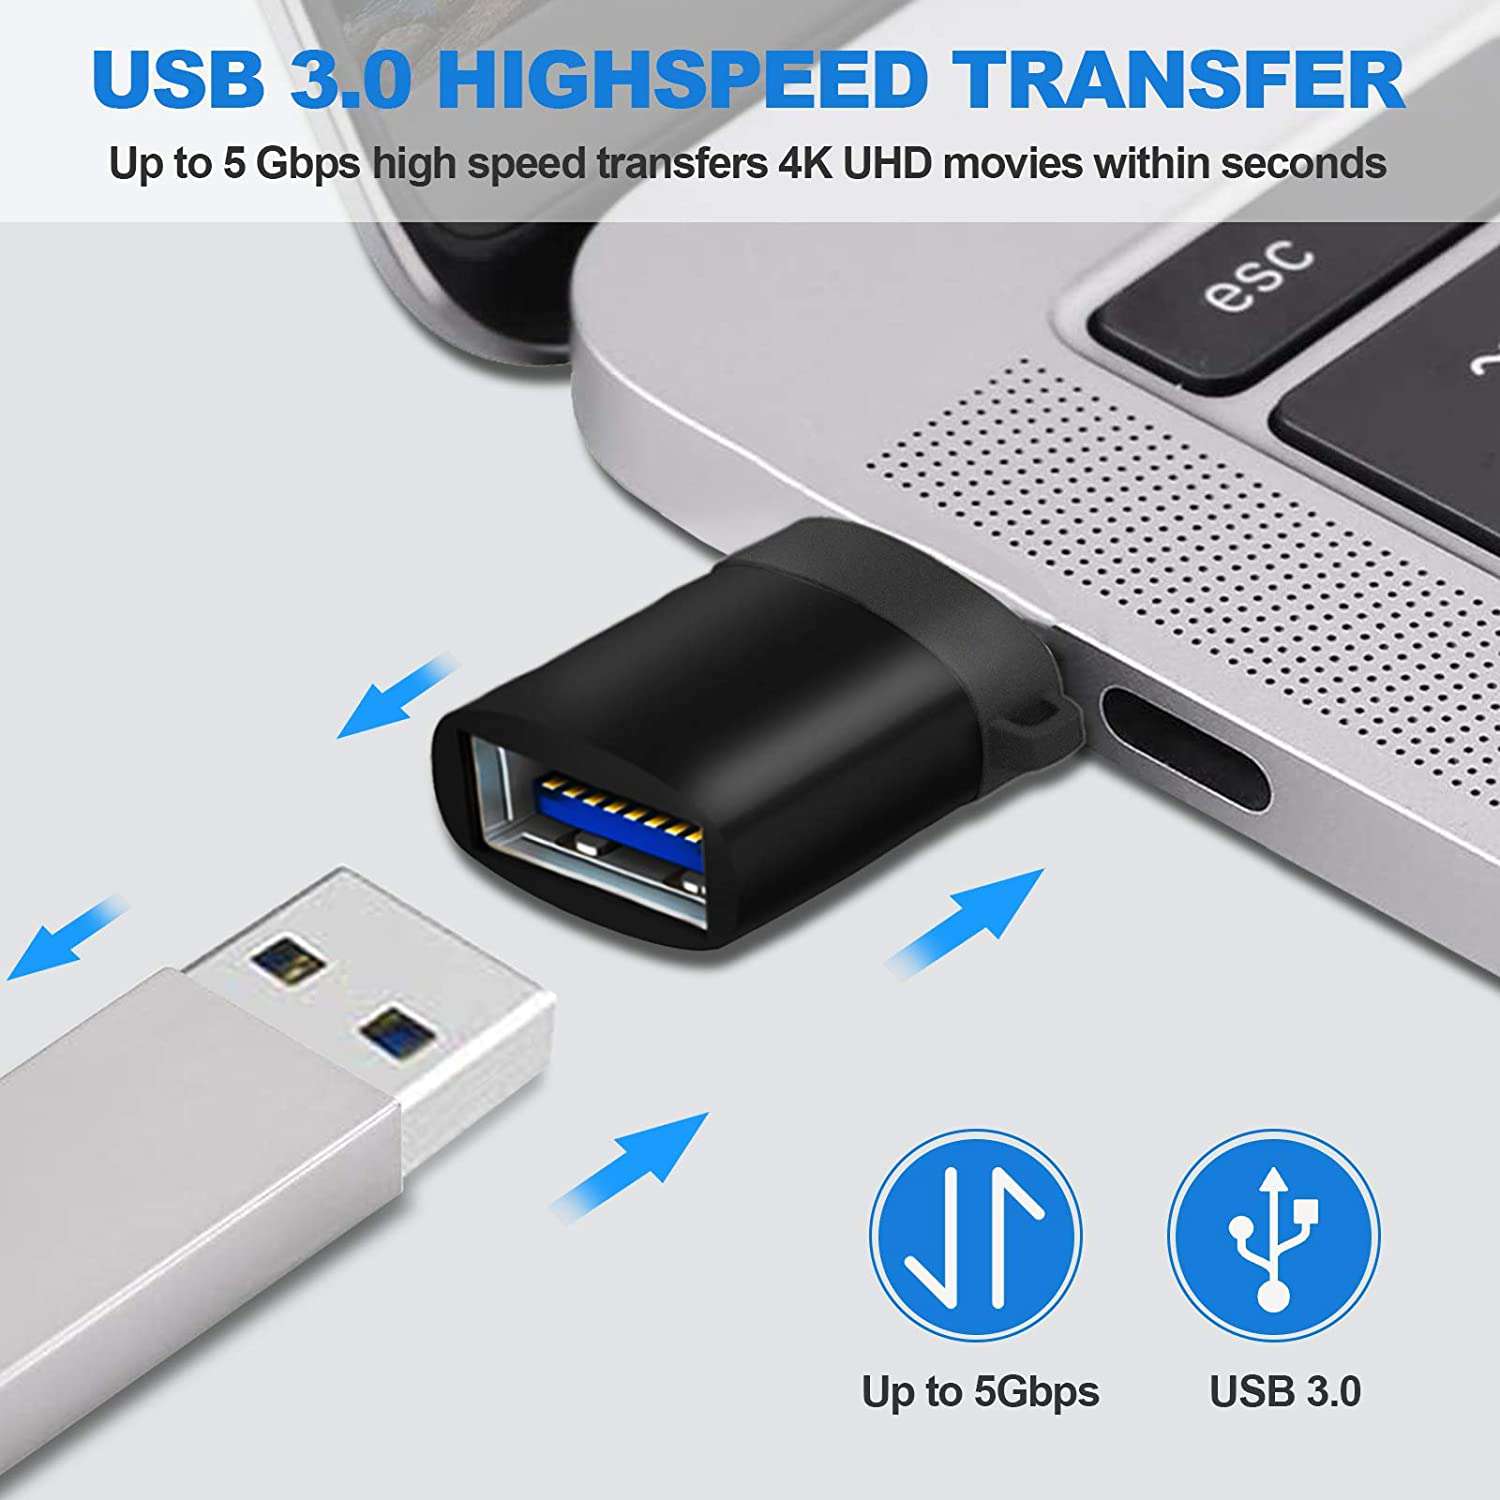 A USB 3.0 high-speed adapter connects the computer and devices to transfer 4K high-definition videos at a speed of 5Gbps.